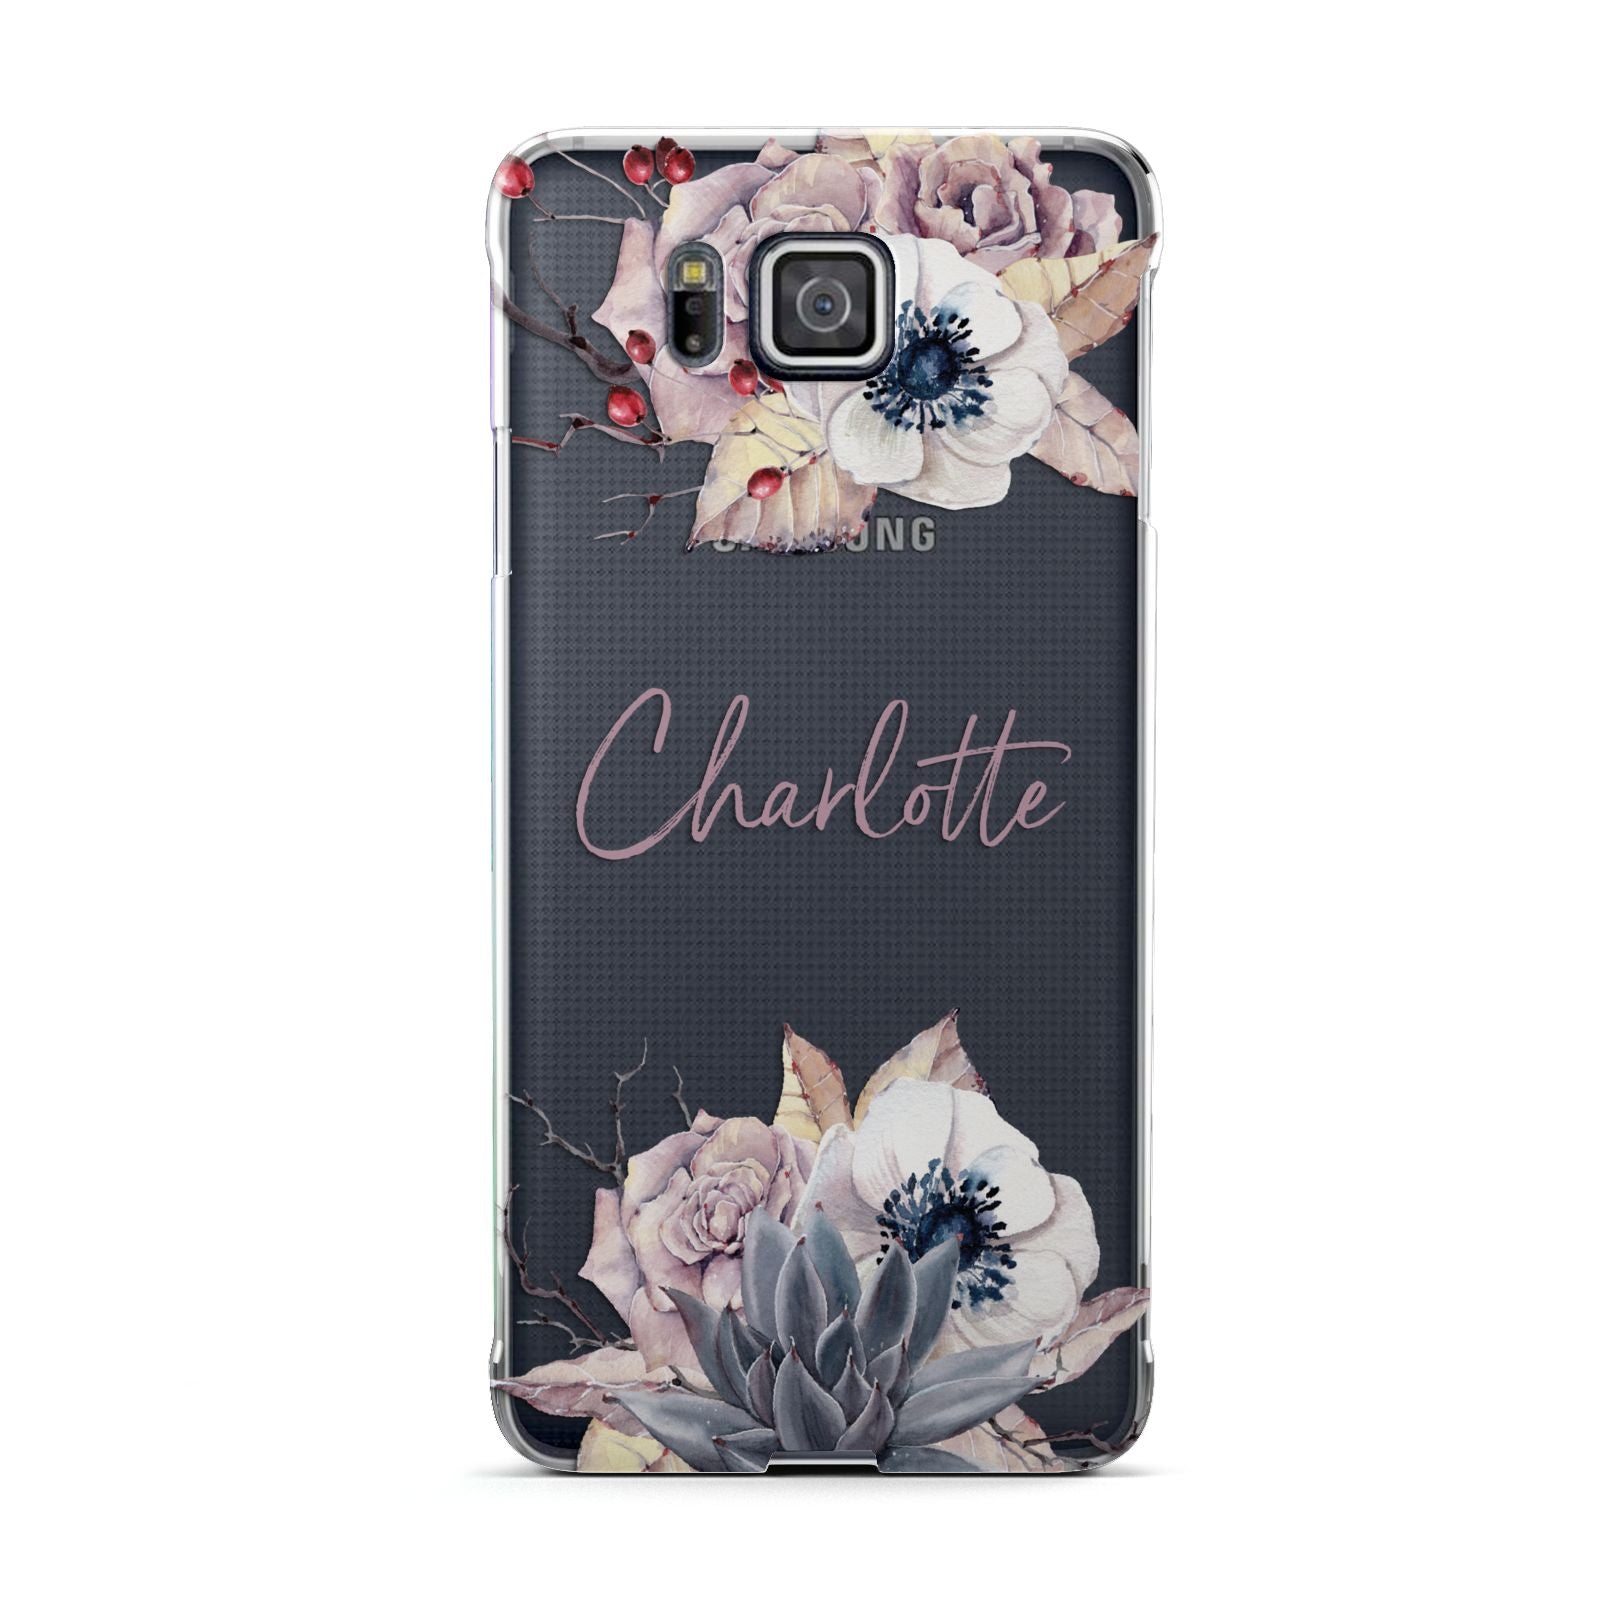 Personalised Autumn Floral Samsung Galaxy Alpha Case